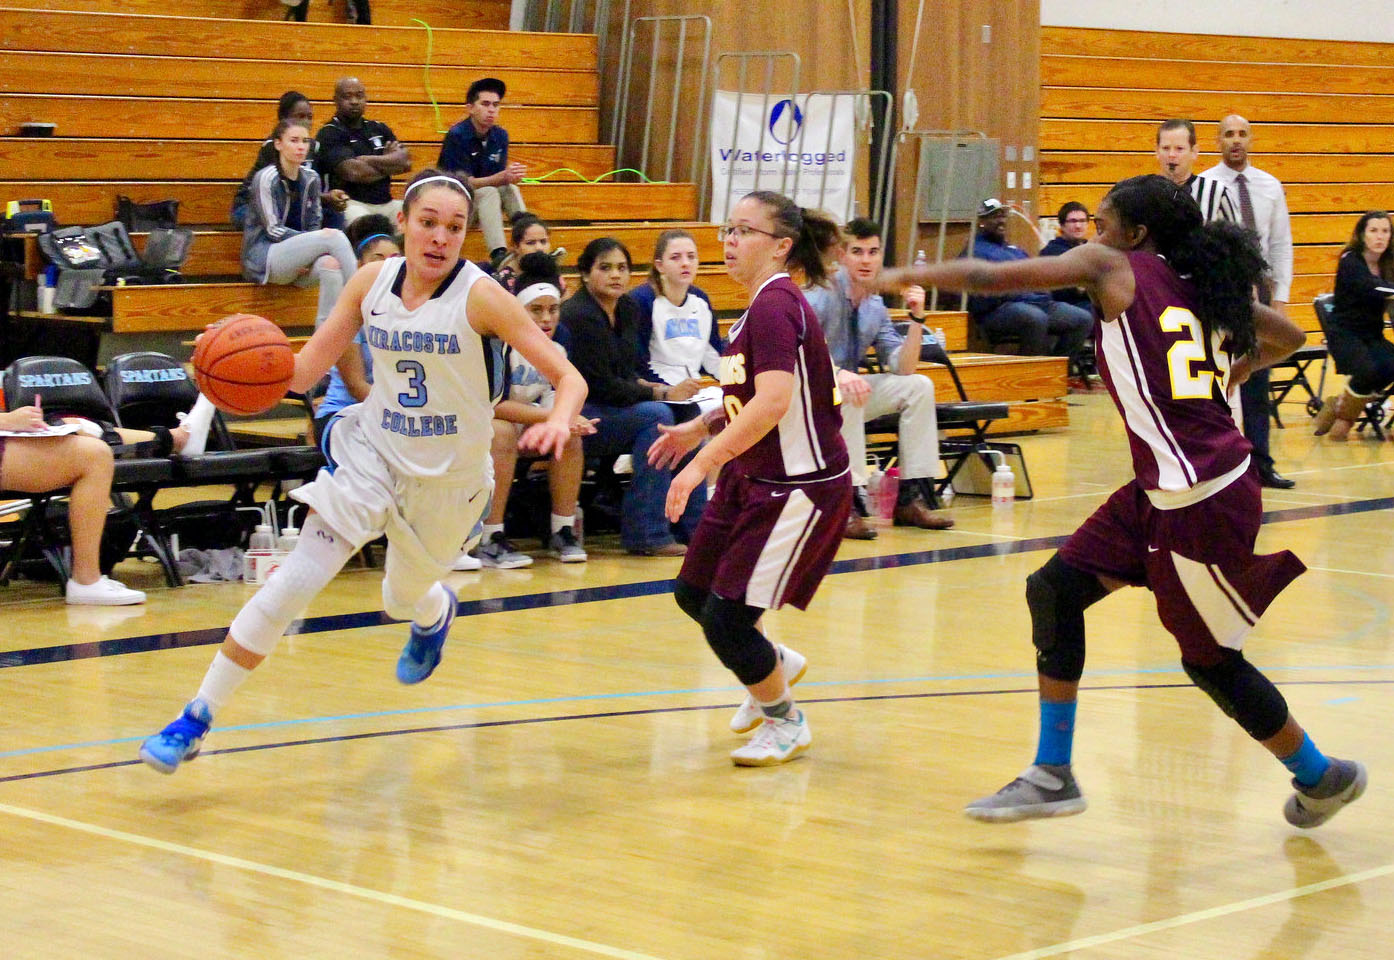 Ayli Tulberg dribbles the ball towards the basket in a recent game.